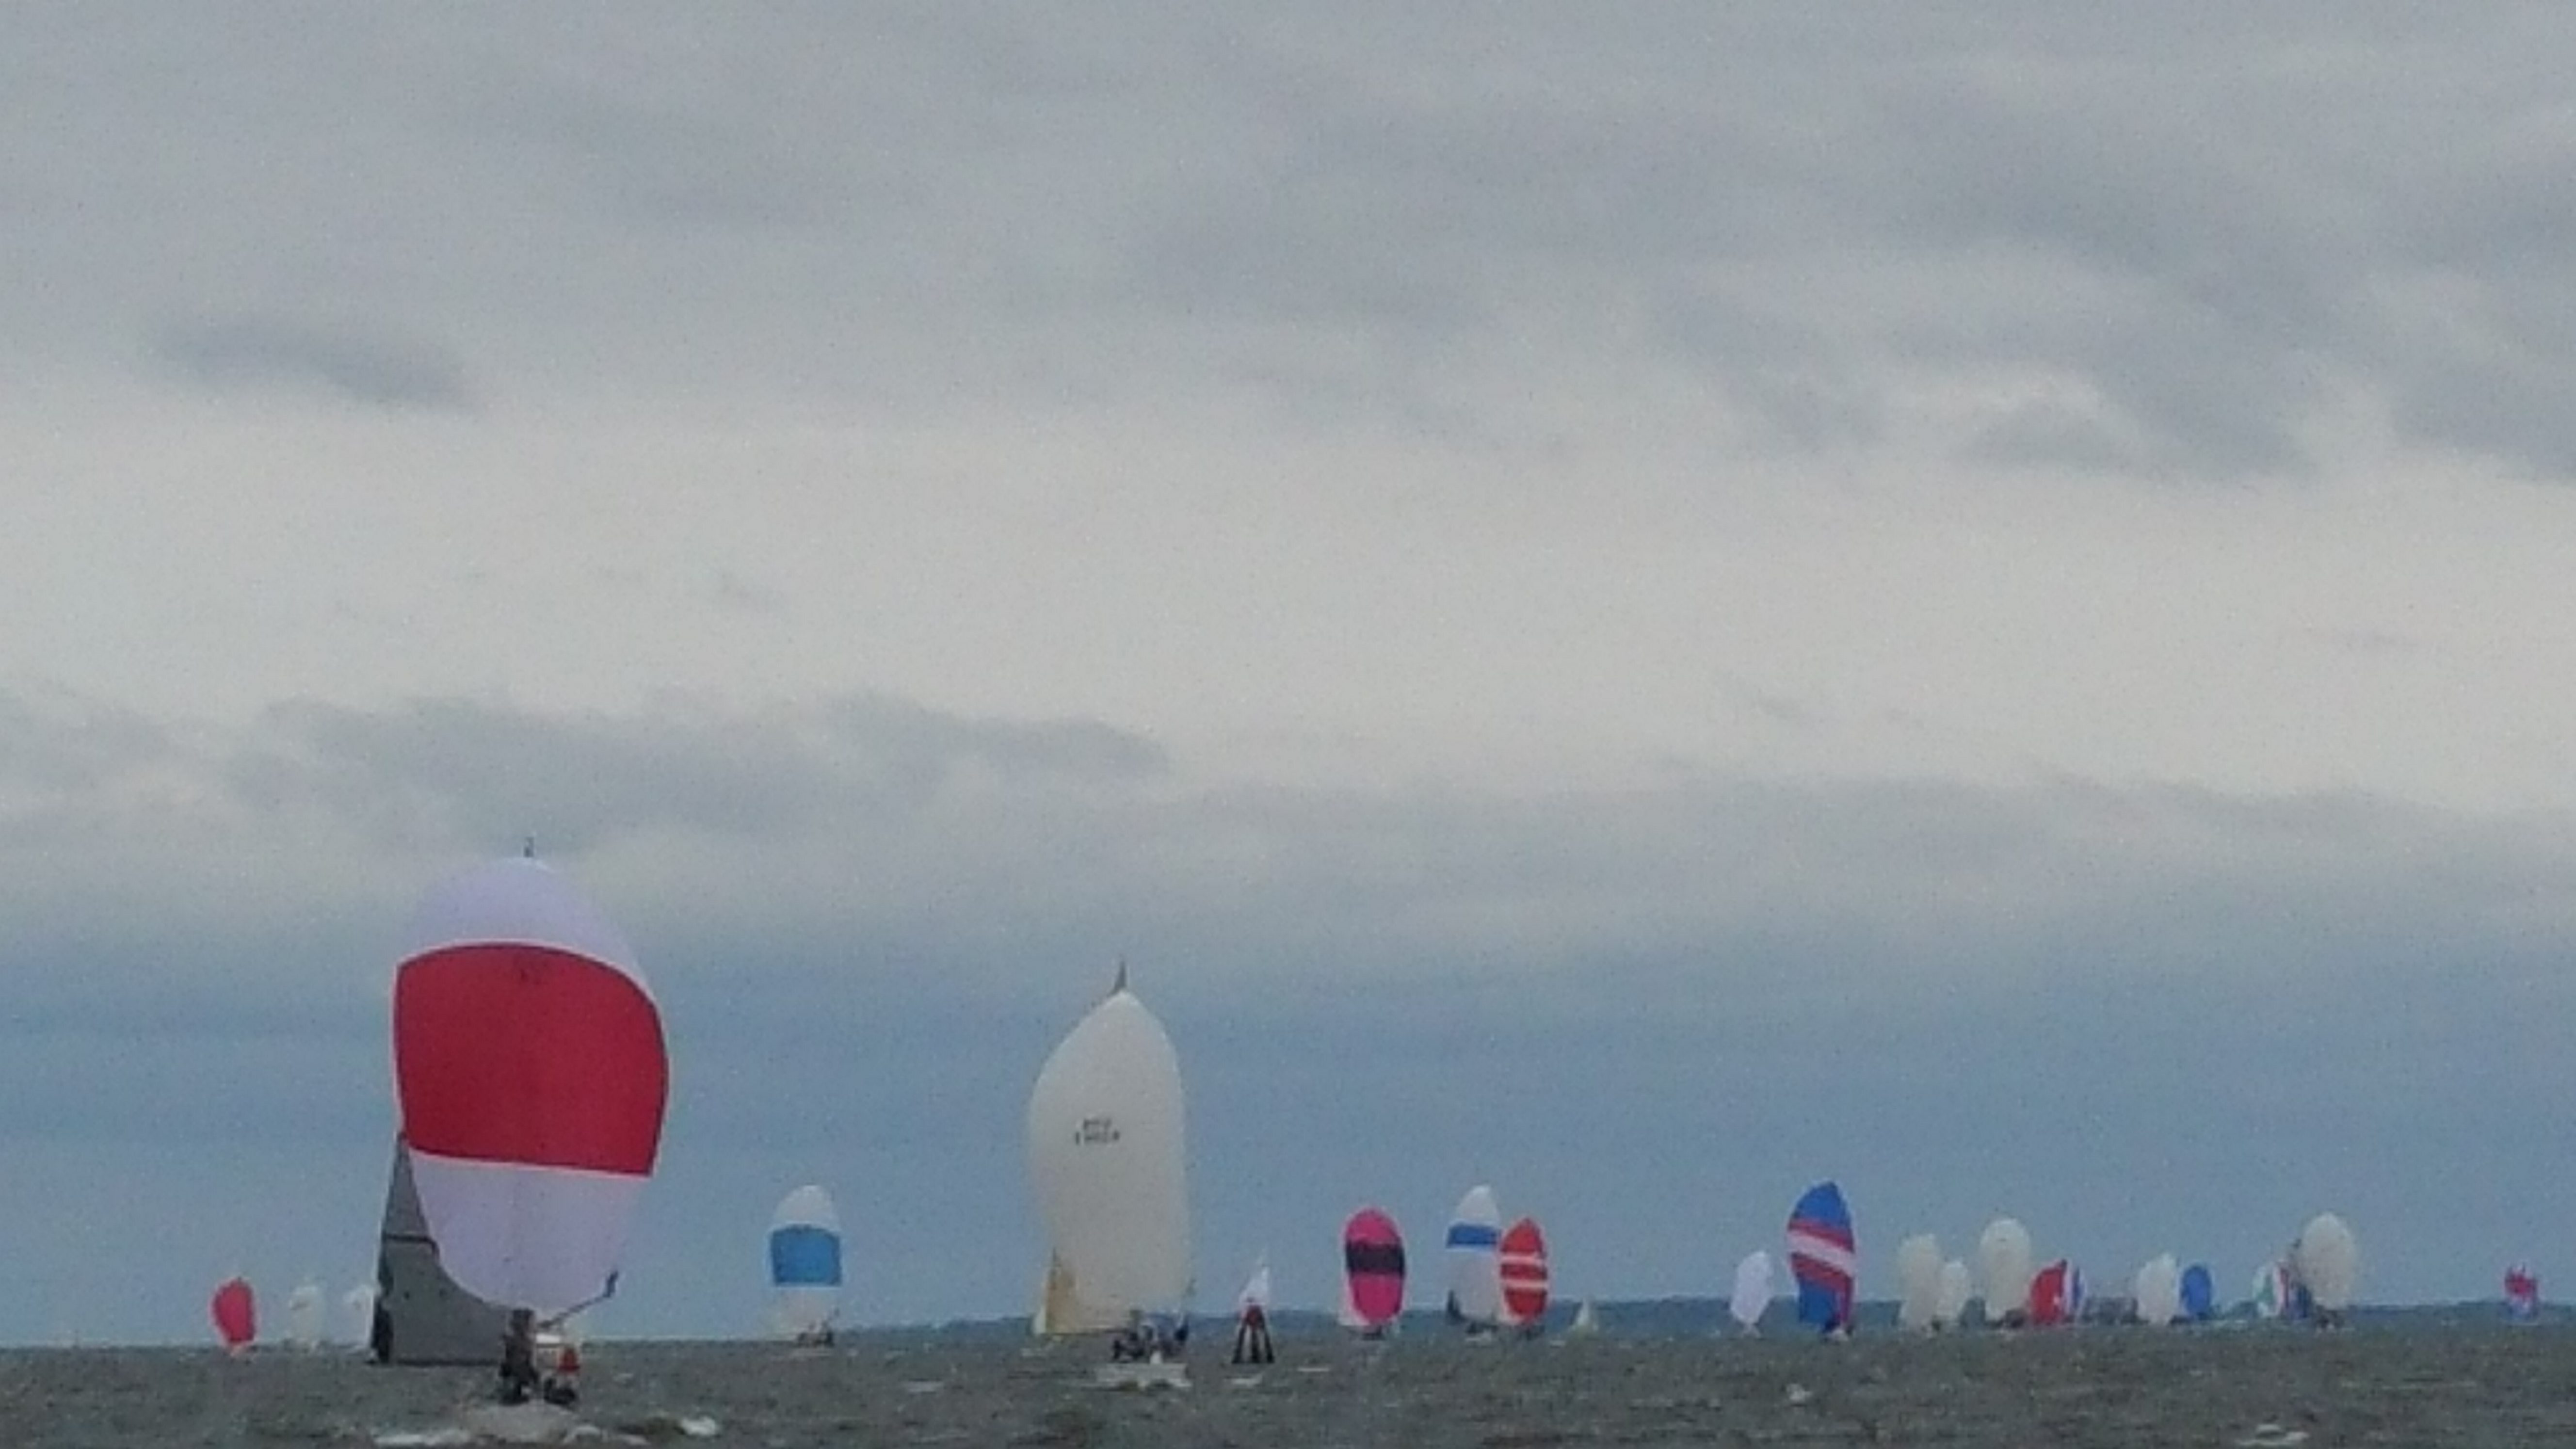 Over 20 colorful sailboats on a cloudy day on the Chesapeake